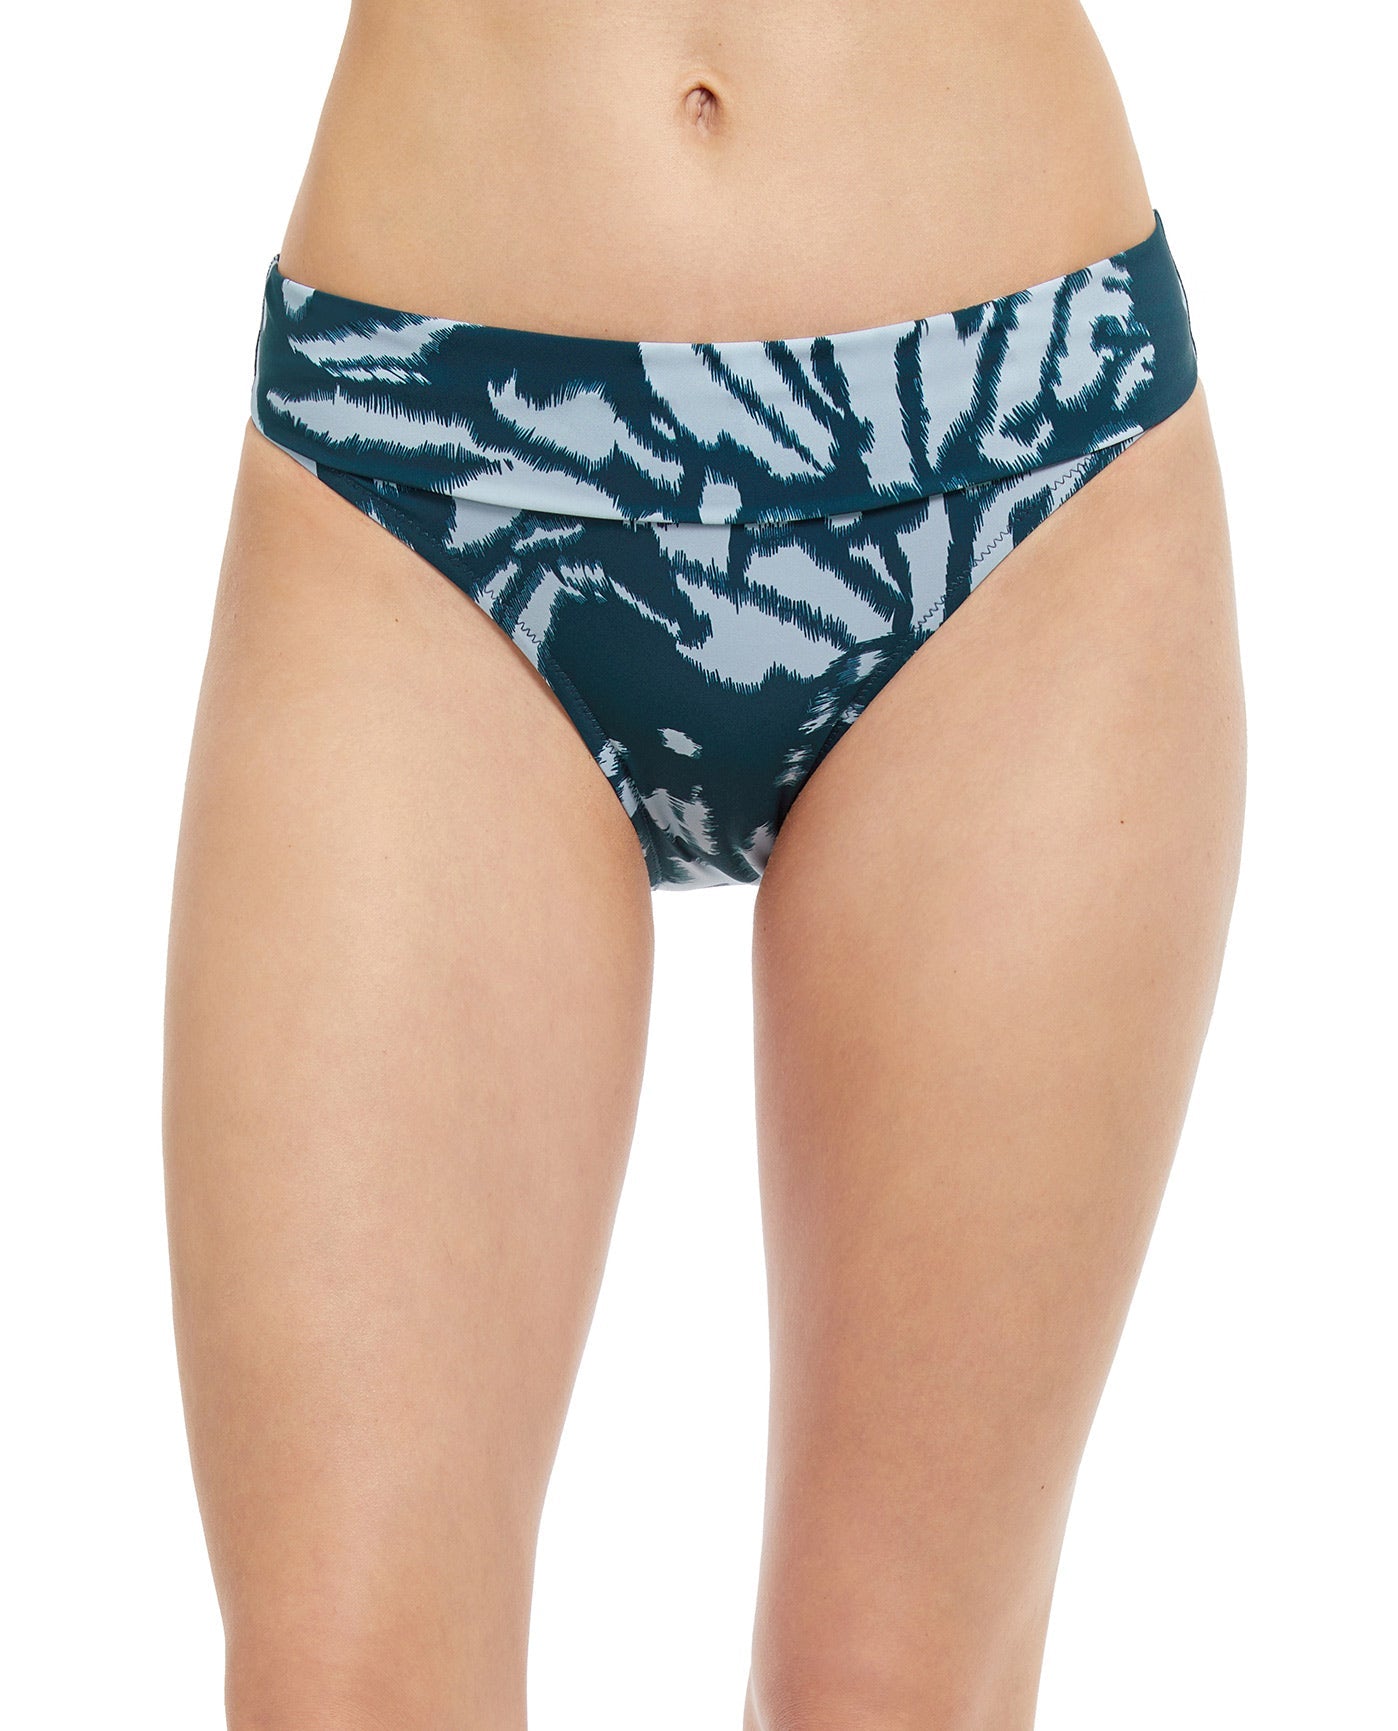 Front View Of Gottex Essentials Miss Butterfly Transformable Foldover Bikini Bottom | Gottex Miss Butterfly Blue